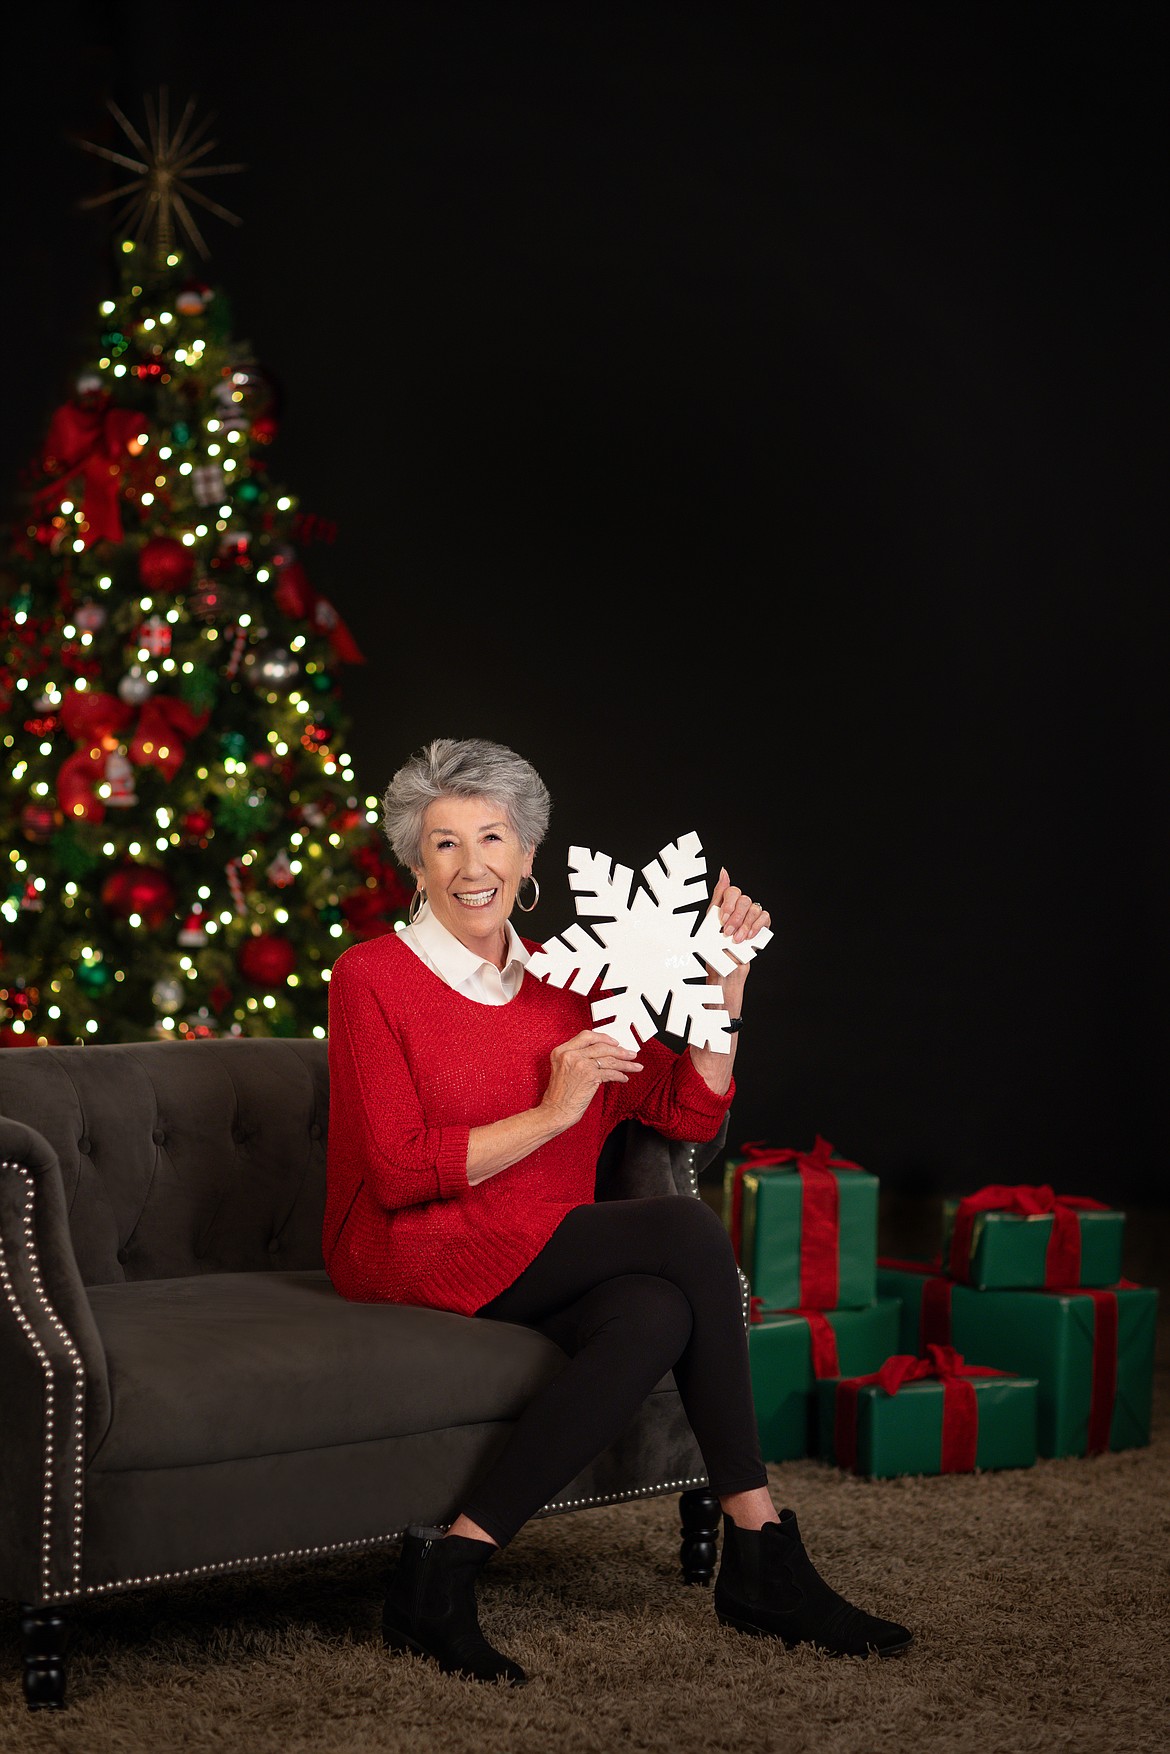 One more time: Ellen Travolta's Christmas show this year will be